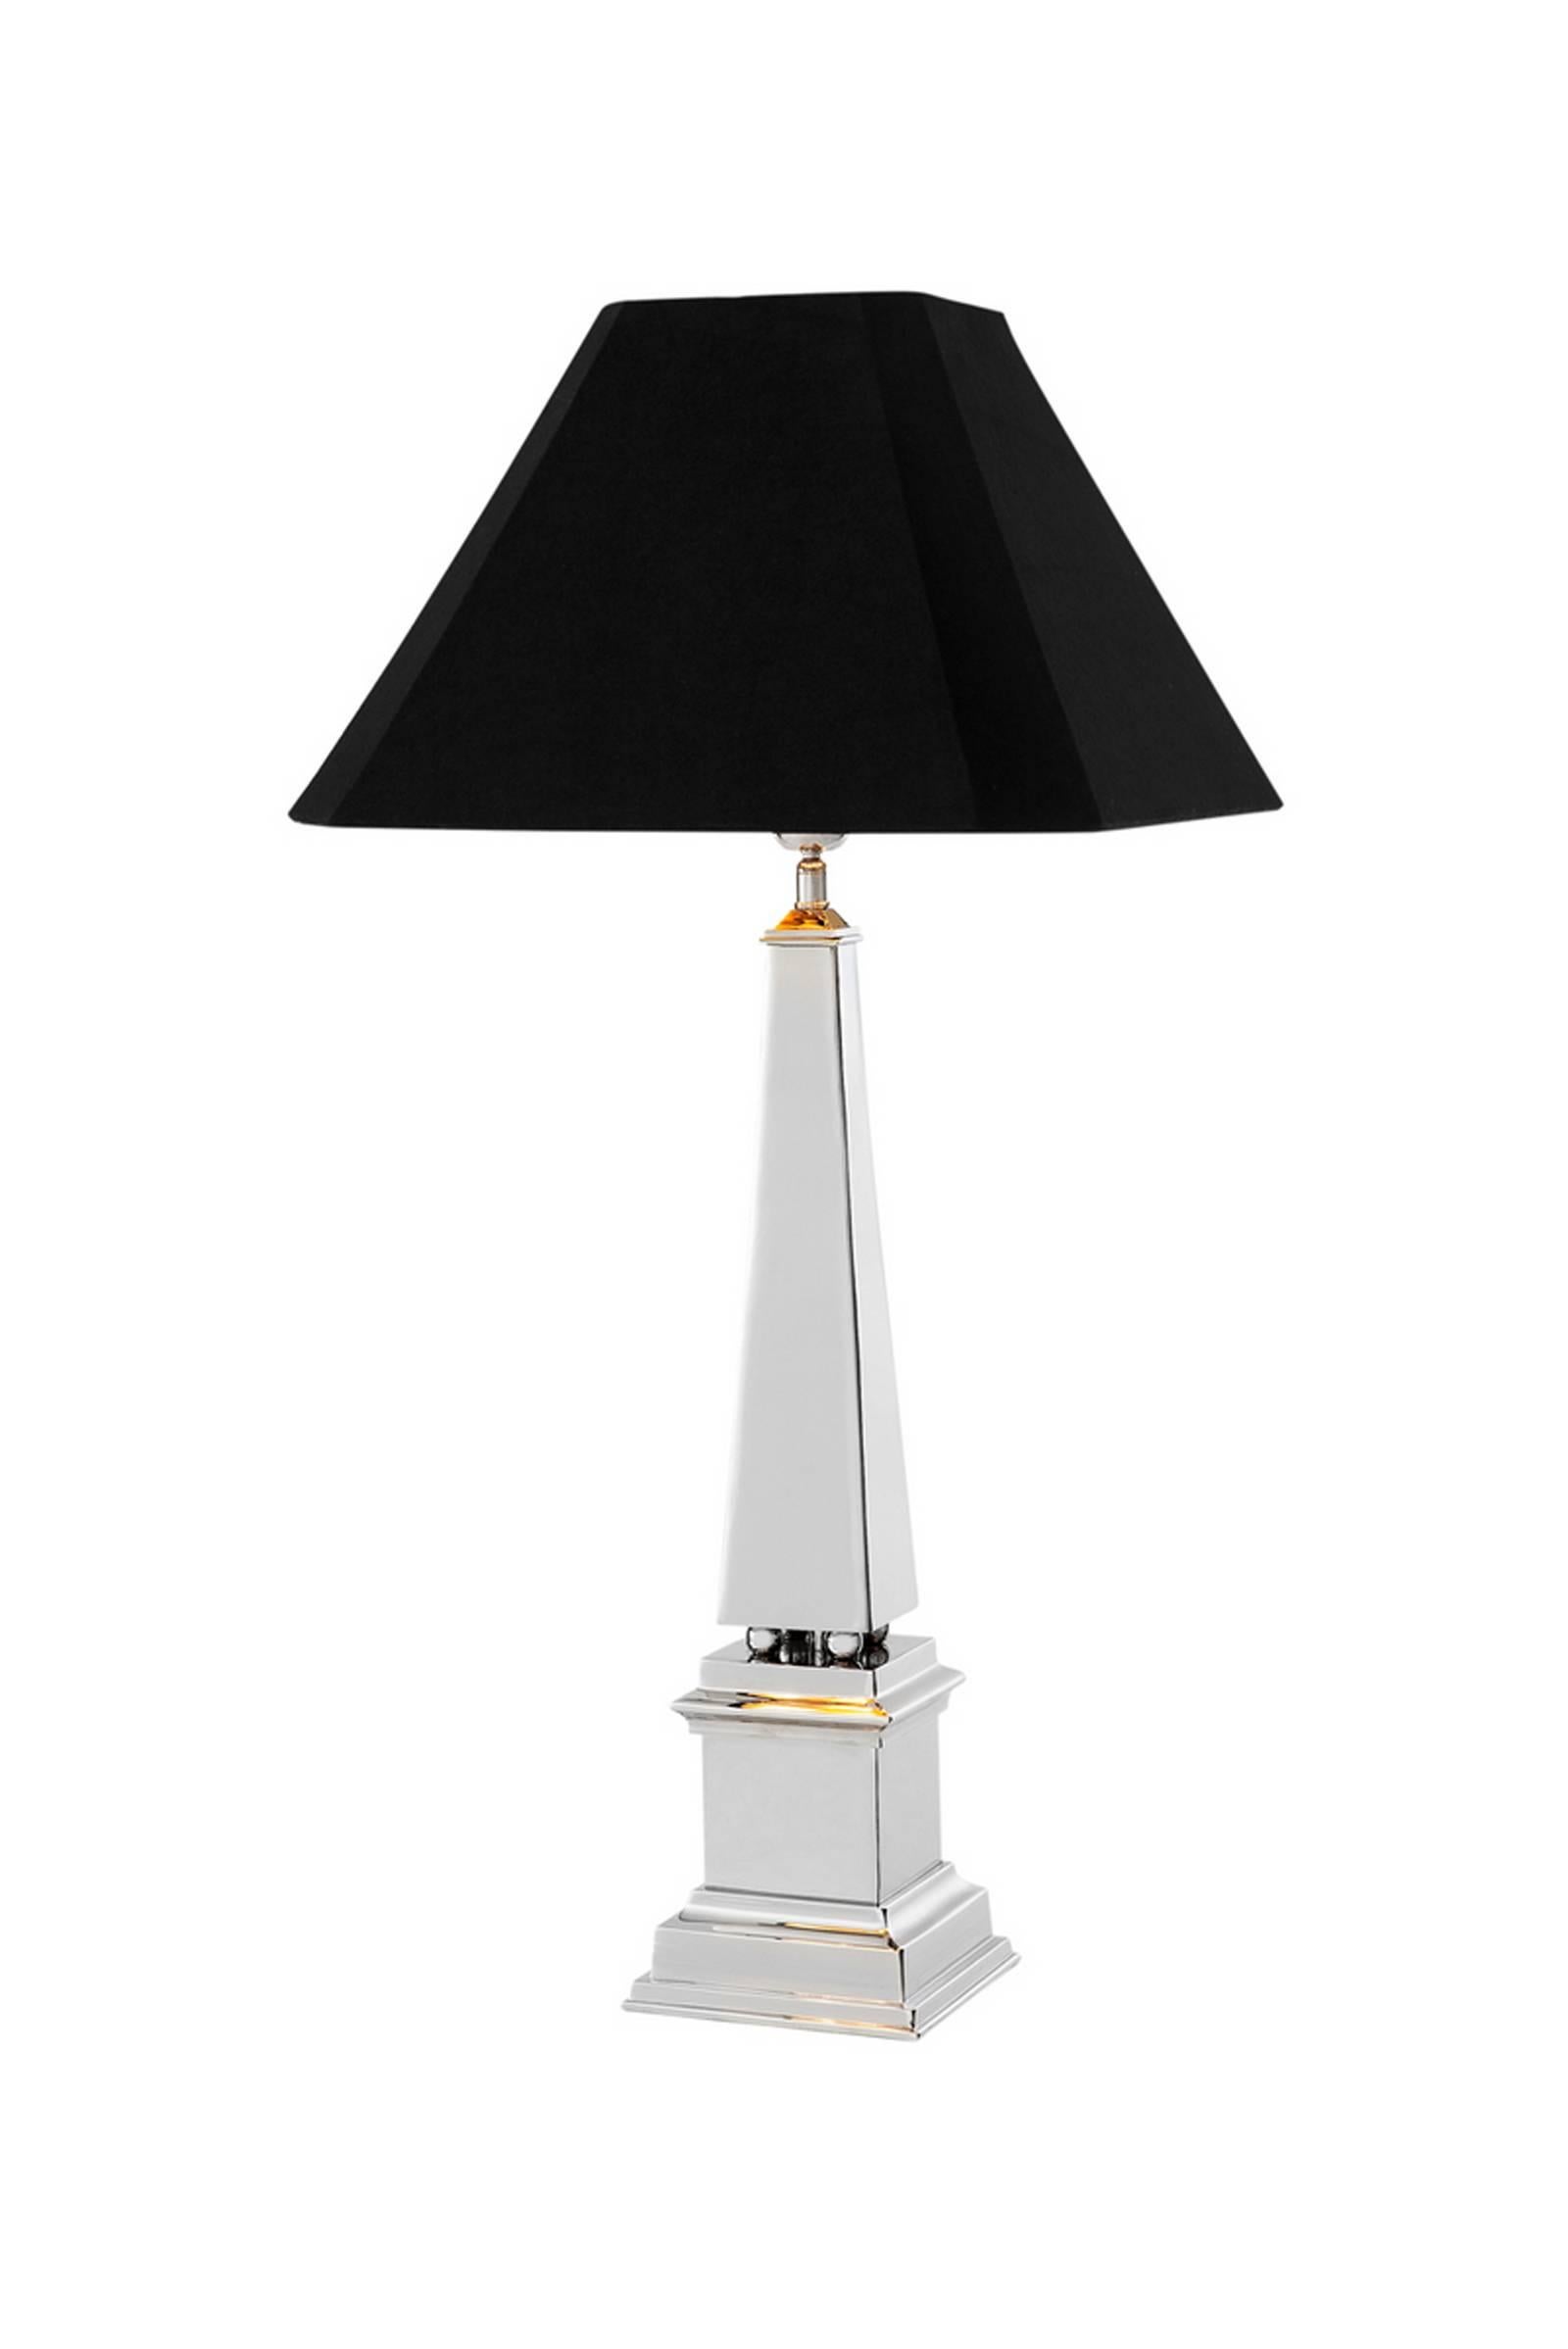 Table lamp obelisk in polished brass,
with black lamp shade.
